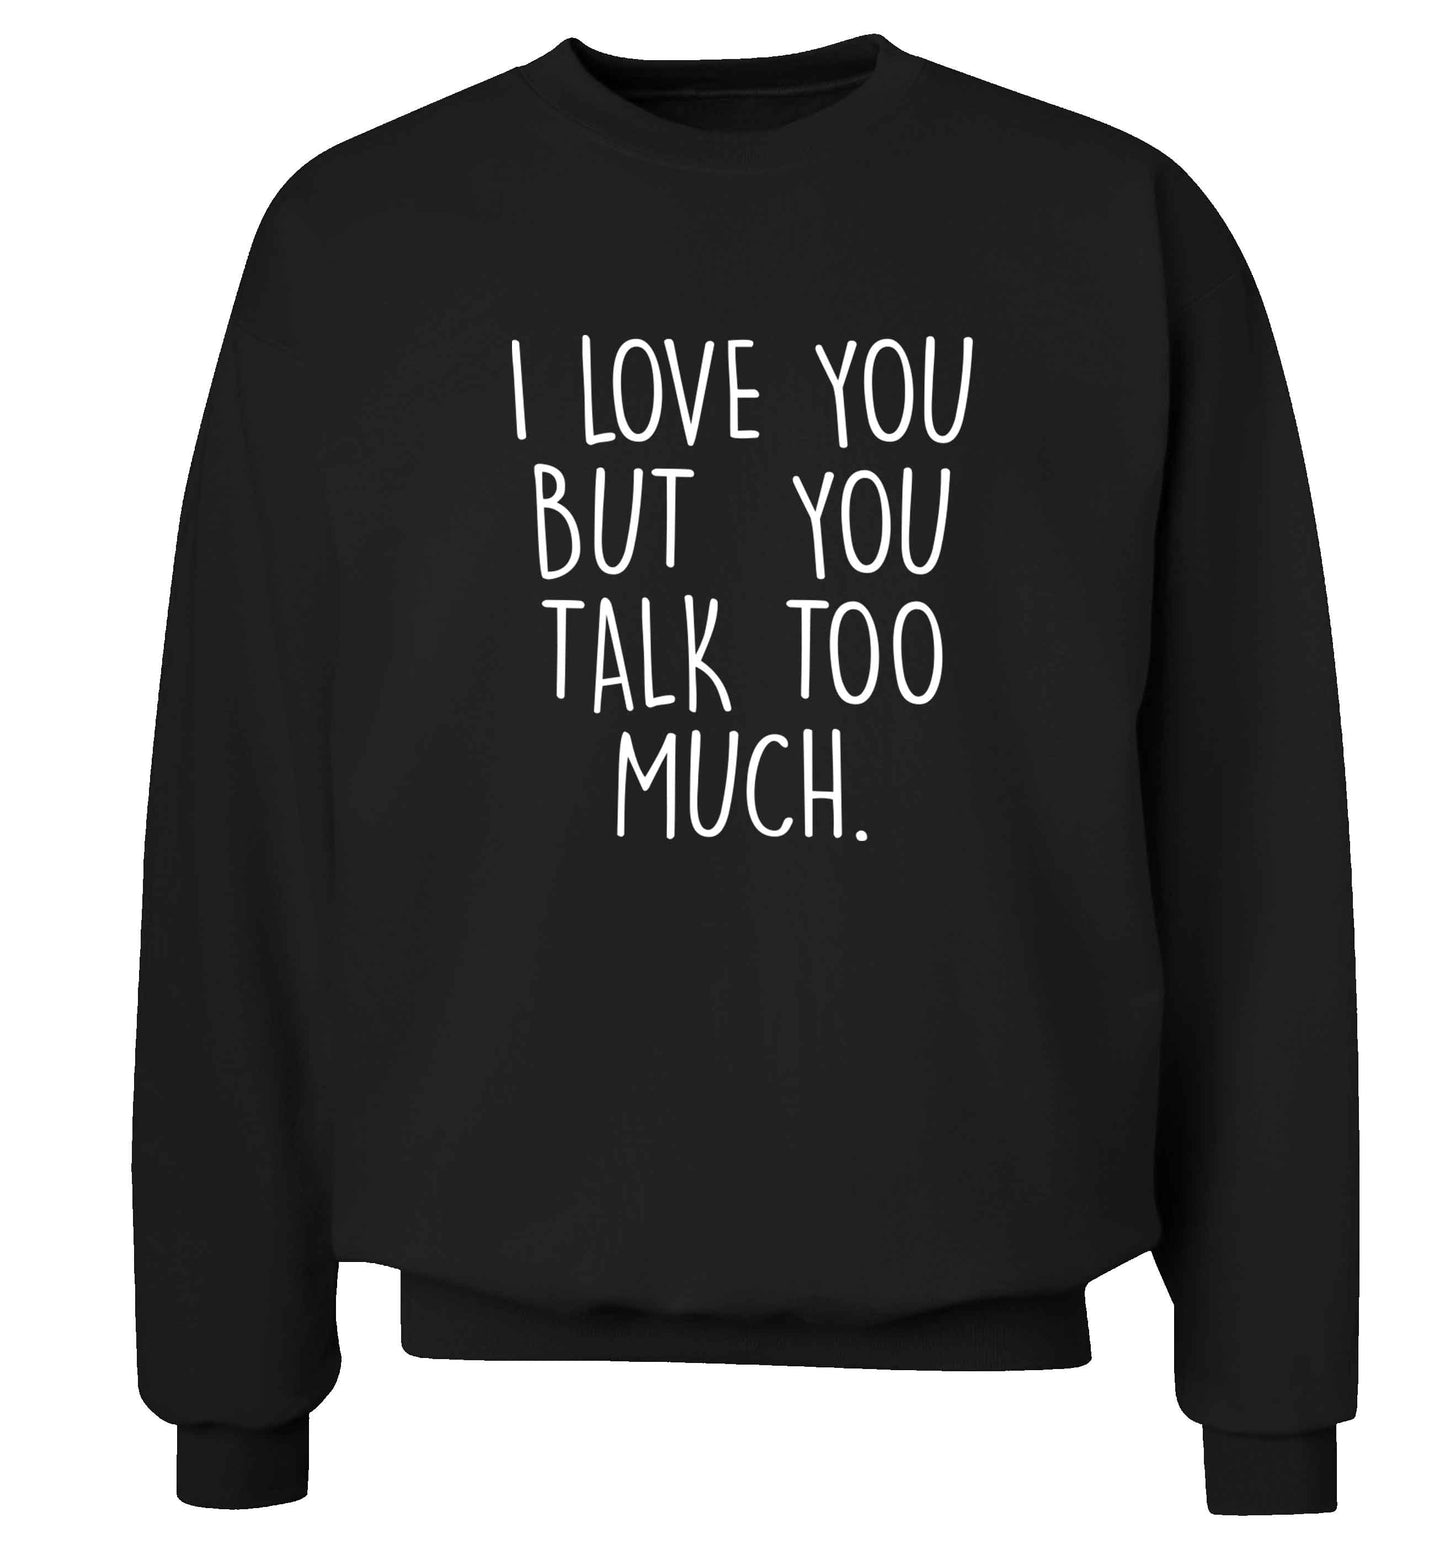 I love you but you talk too much adult's unisex black sweater 2XL